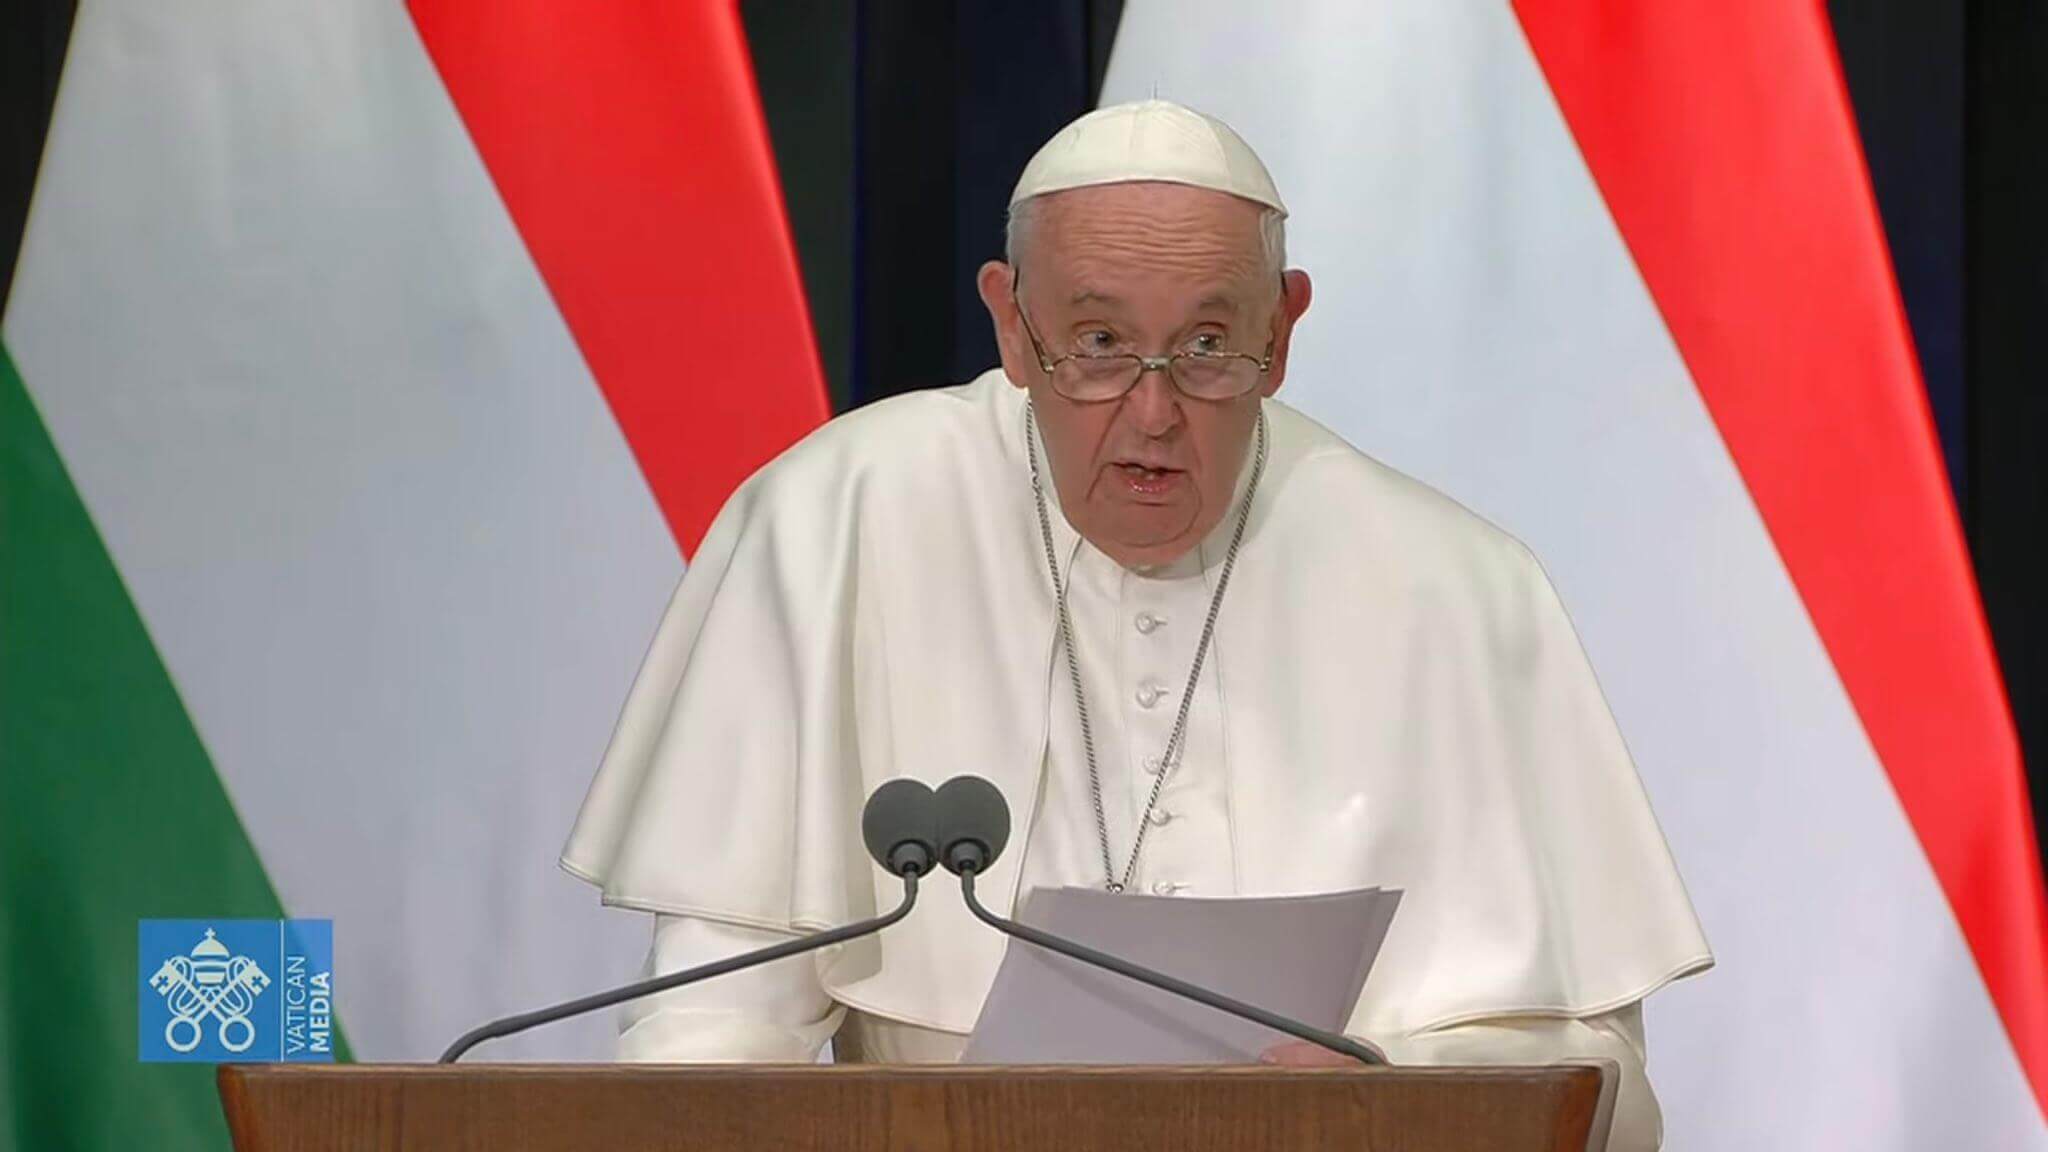 Pope Francis in his first public address in Hungary denounces gender ideology, warning of the “baneful path taken by those forms of ideological colonisation that would cancel differences, as in the case of the so-called ‘gender theory’